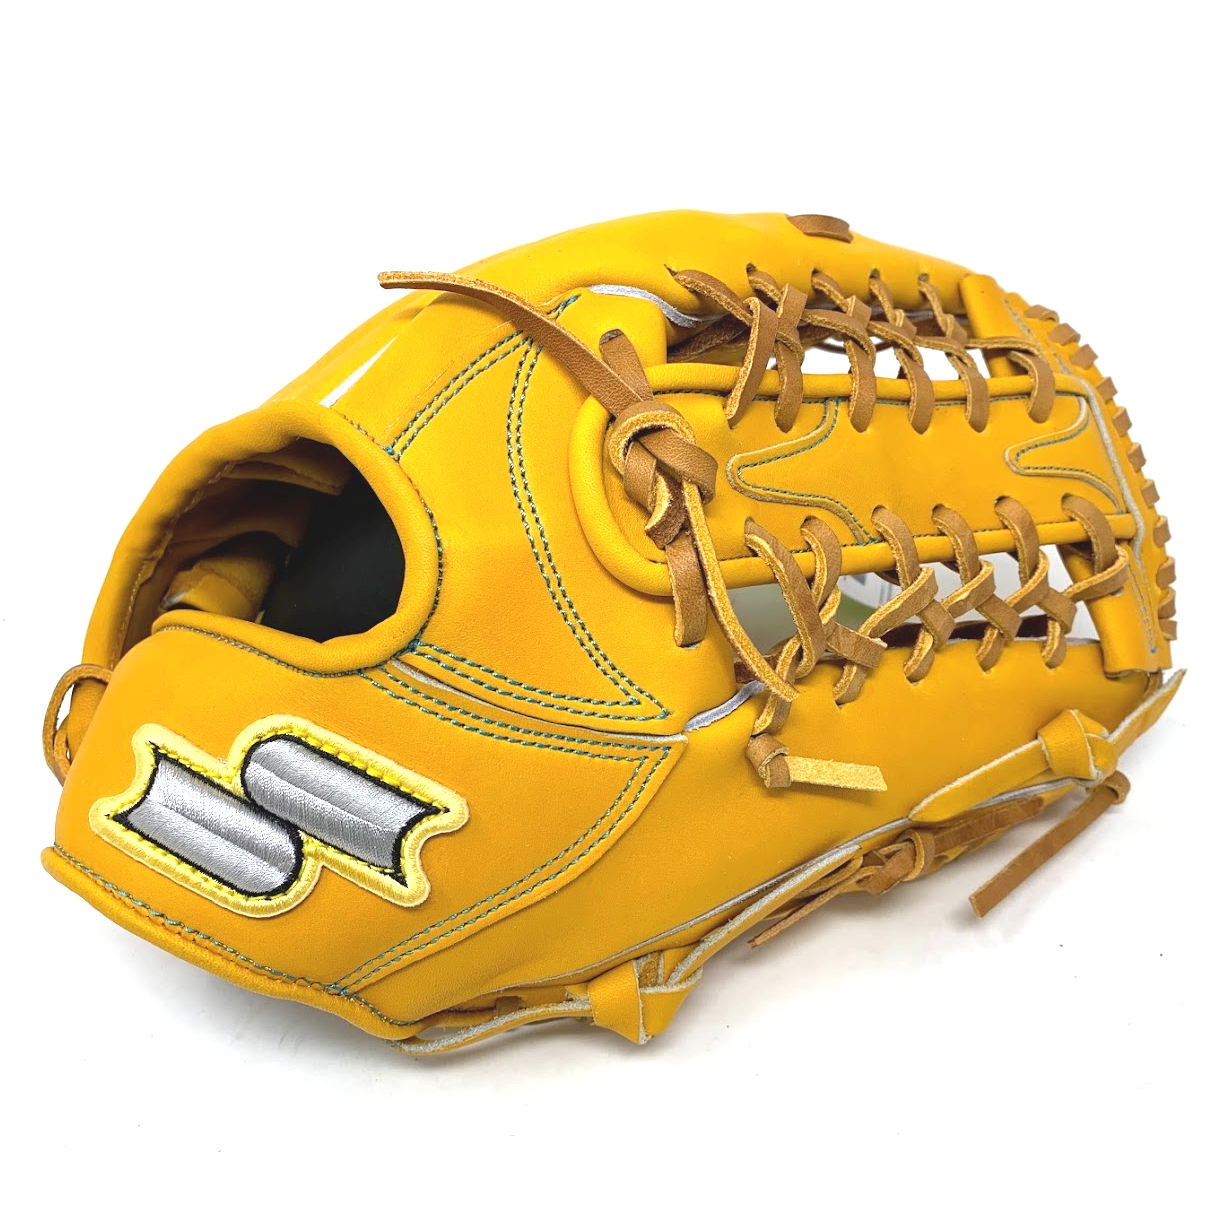 The SSK Taiwan Silver Series is made for players who had passed the intro stages of ball to the advanced. SSK strictly picked the strong US Steerhide and shaped them with the most fashionable style.  US Steerhide from the North American cattle, which is about 18 months old, has been produced and tanned by Taiwanese professional leather factories. Taiwan factories tend to produce baseball gloves with goal of being thick and durable. The factories employ senior craftsman to adjust the shape of the gloves so that players can limit the break in time. The glove of this series is still considered somewhat rigid, and players need some time to break in it and put it into the field. US Steerhide has currently become one of the most widely adopted high-class leather on the market. For SSK Silver Series, the thumb/pinky stripes will be extended to fingertips, which will strengthen the structure and have good control of the glove.